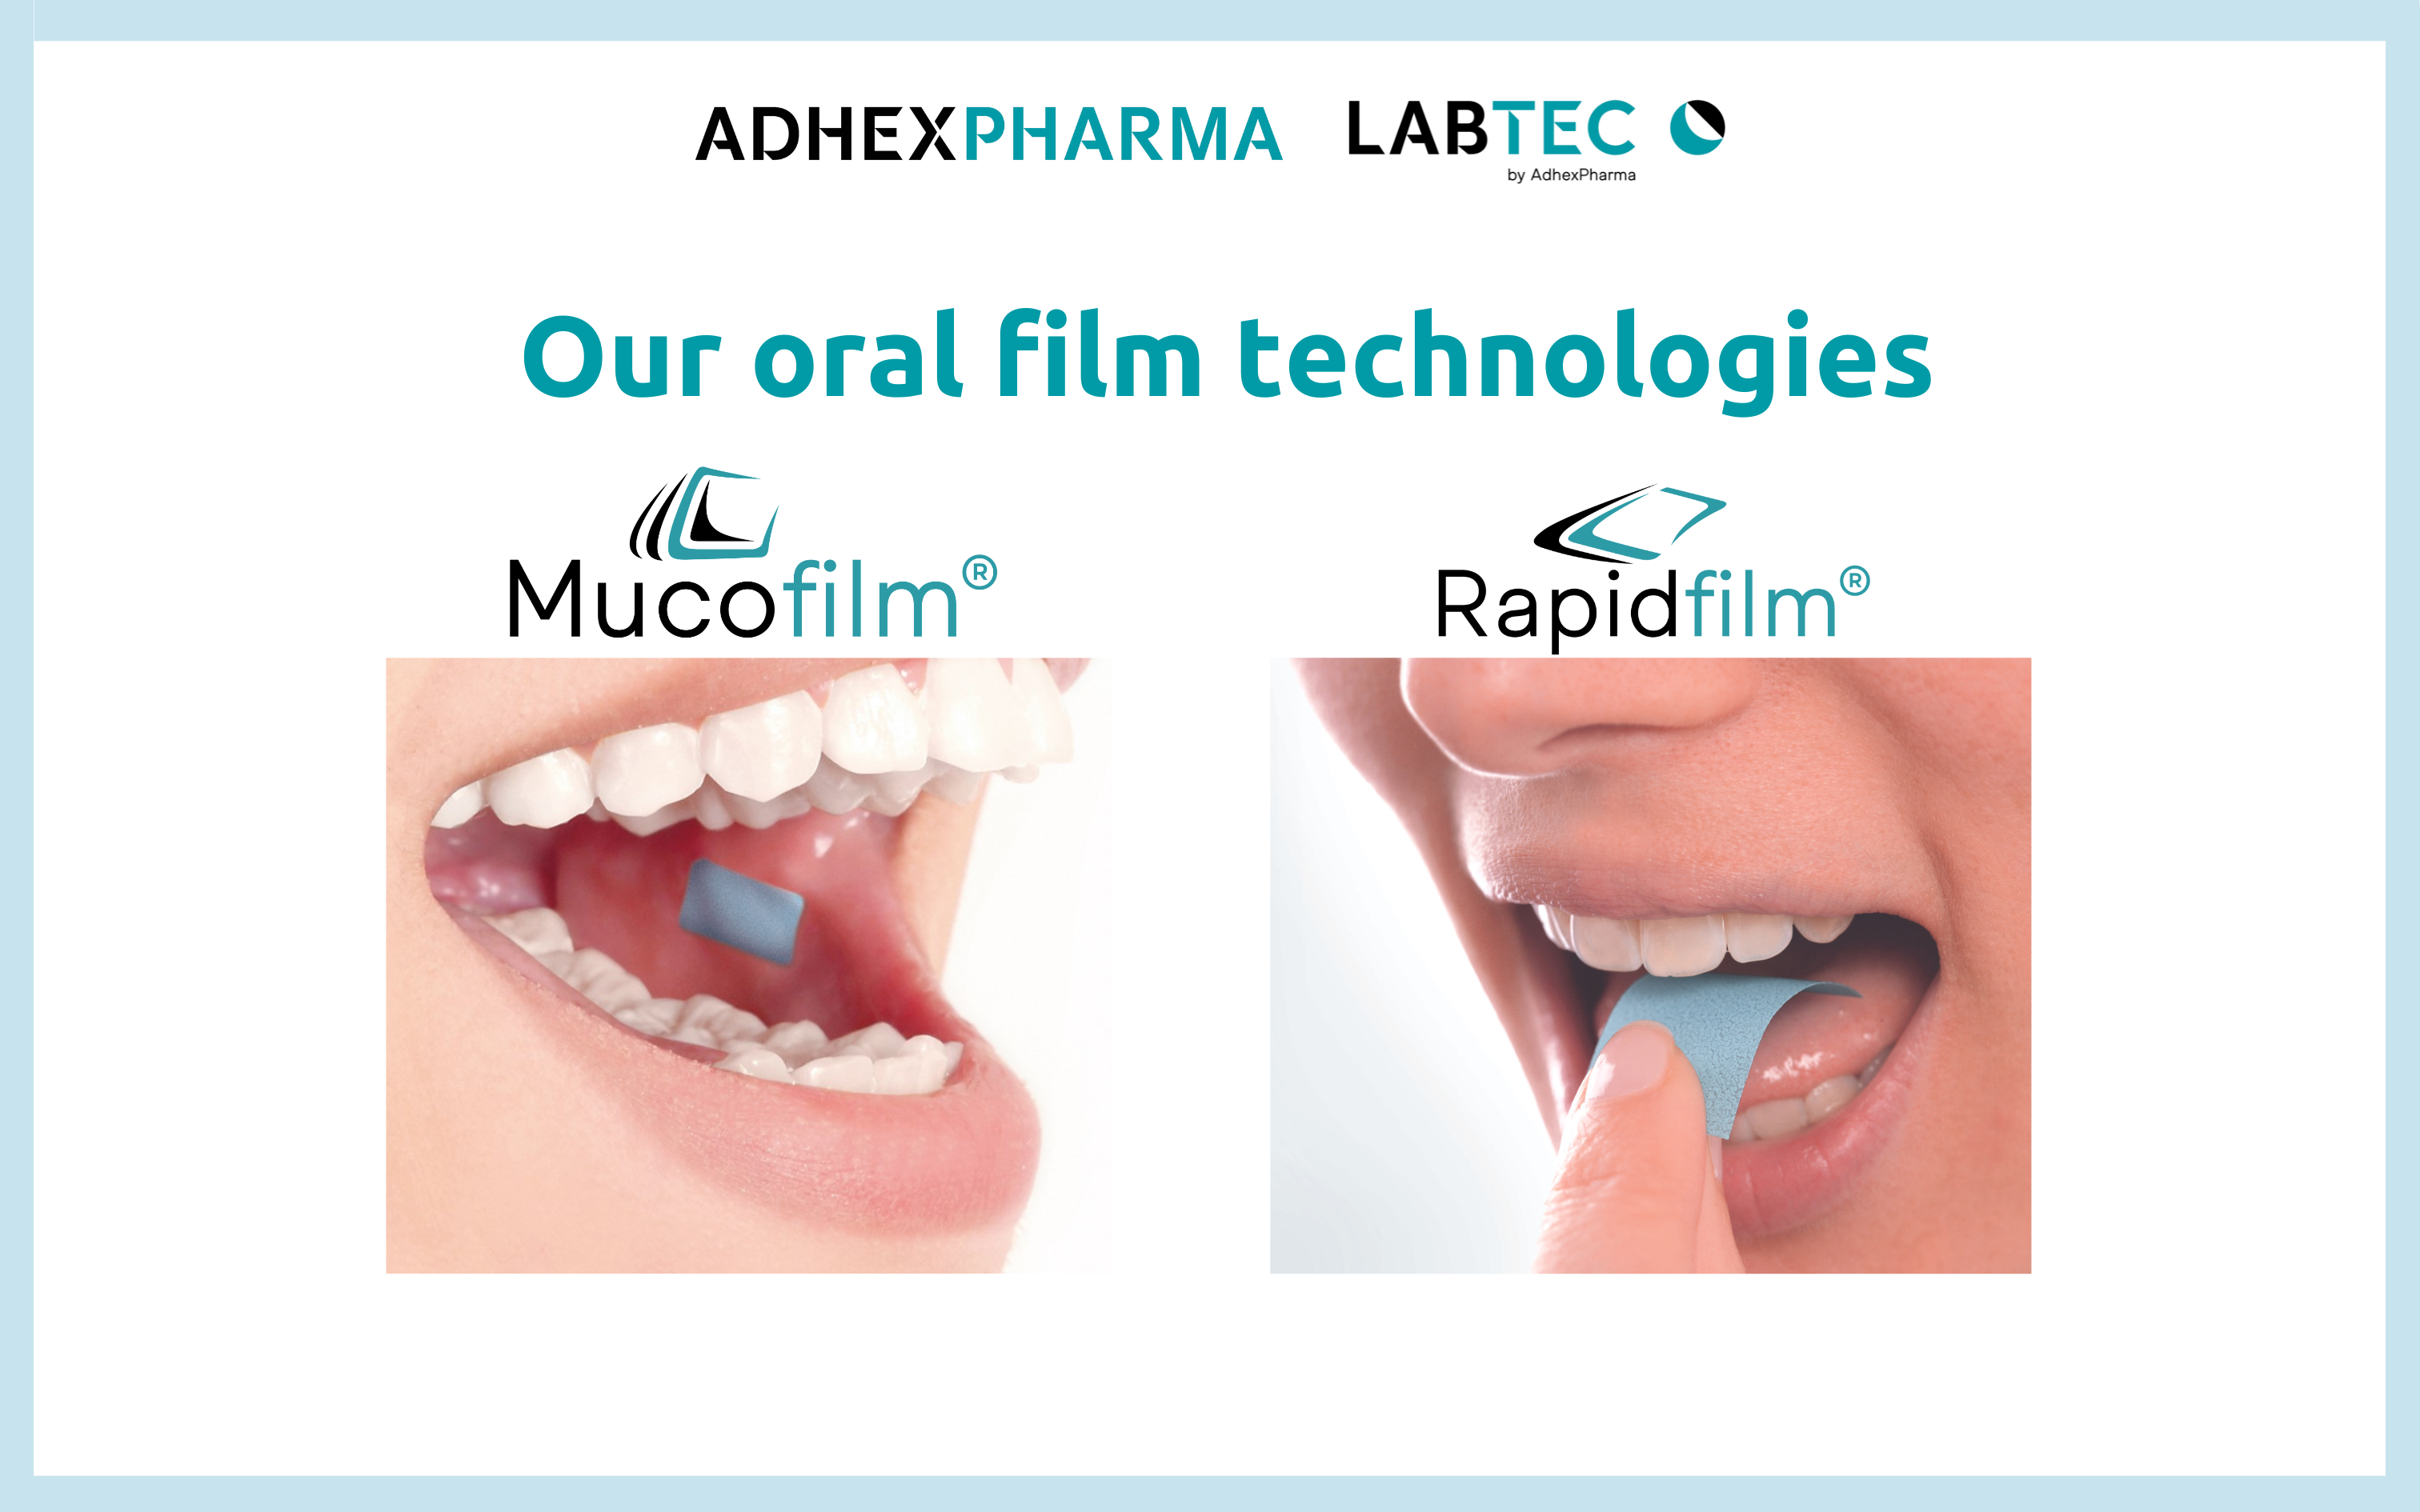 Oral film technologies by AdhexPharma and Labtec